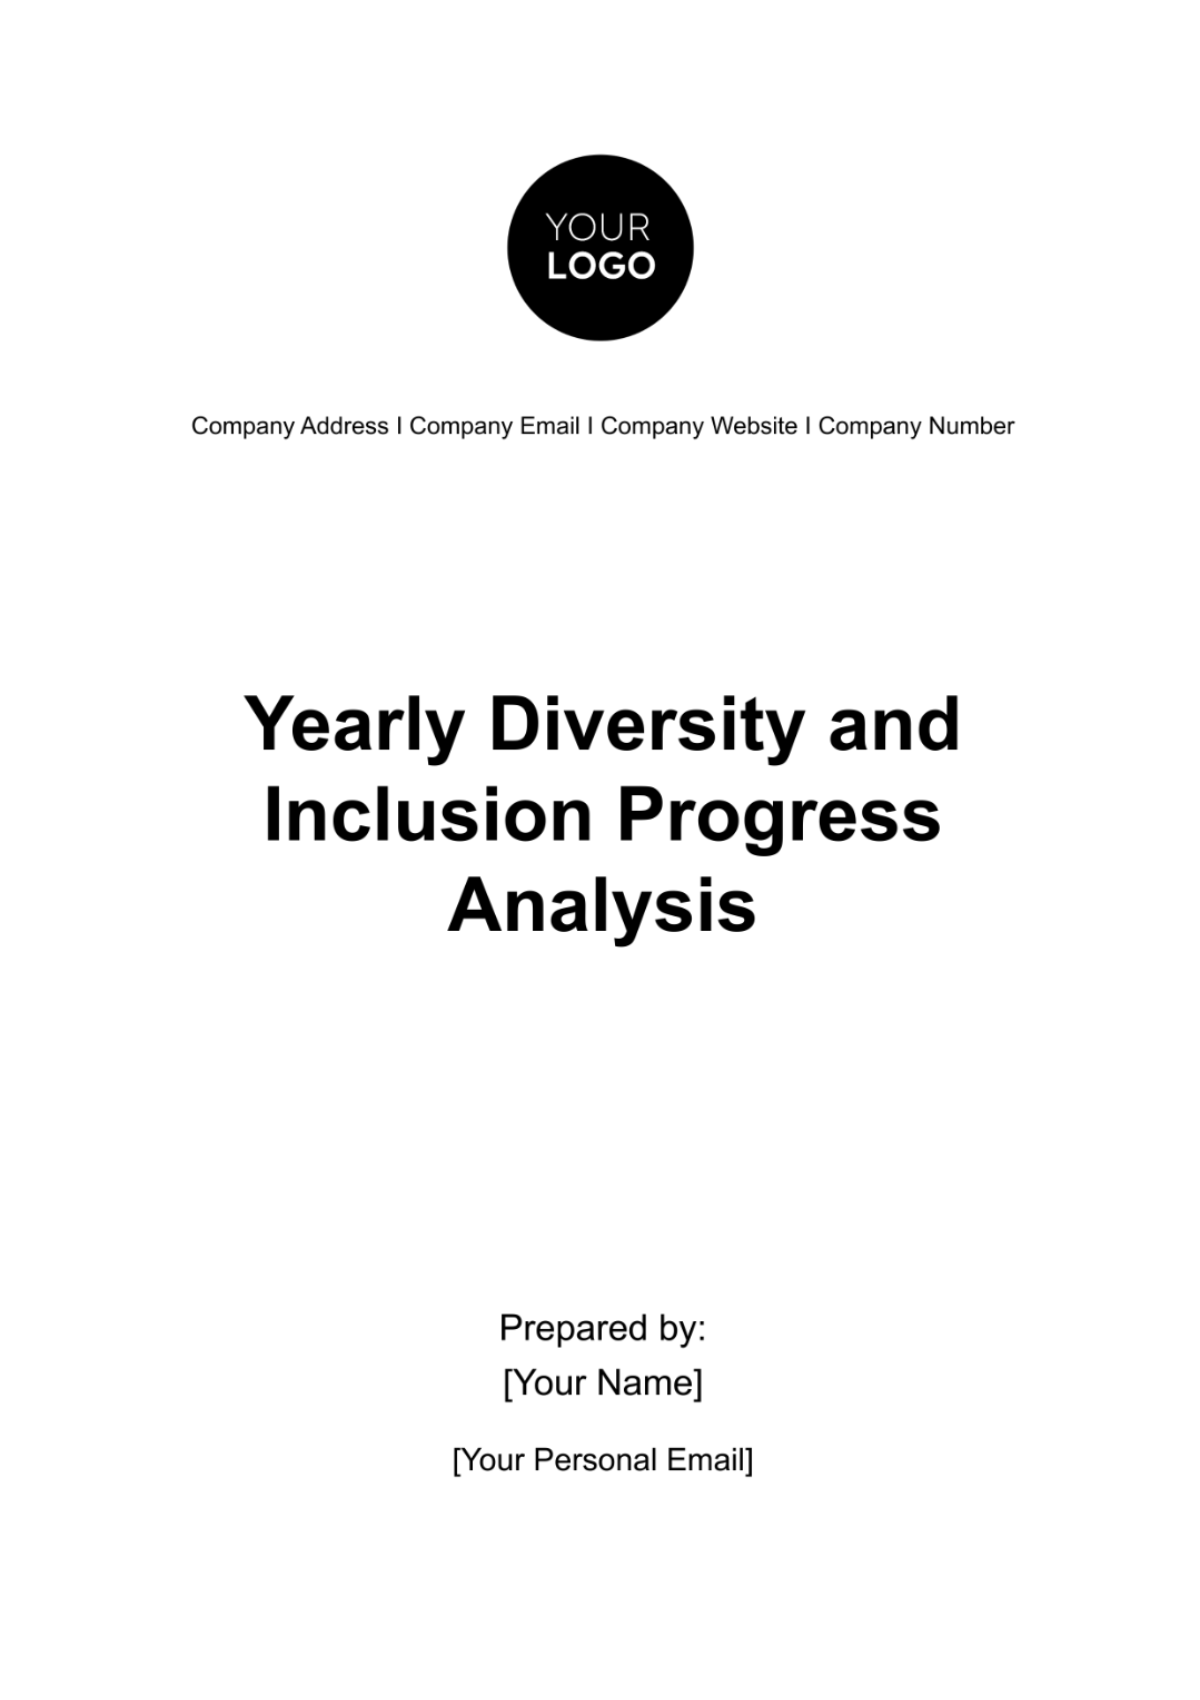 Free Yearly Diversity and Inclusion Progress Analysis HR Template